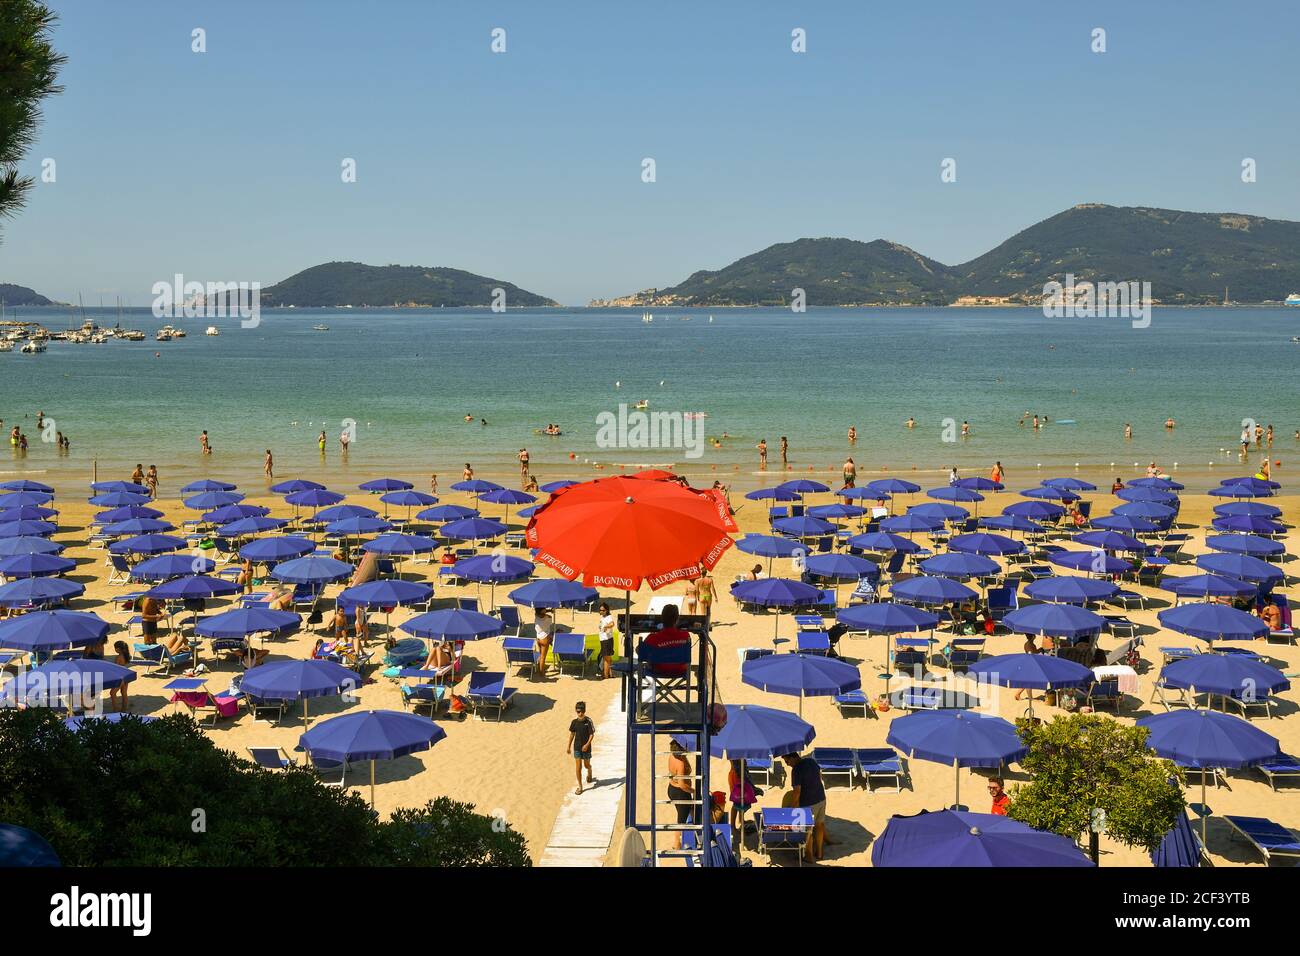 Sandy beach with lifeguard tower and rows of sun umbrellas on the shore of Gulf of Poets with Porto Venere and Palmaria Island, Lerici, Liguria, Italy Stock Photo